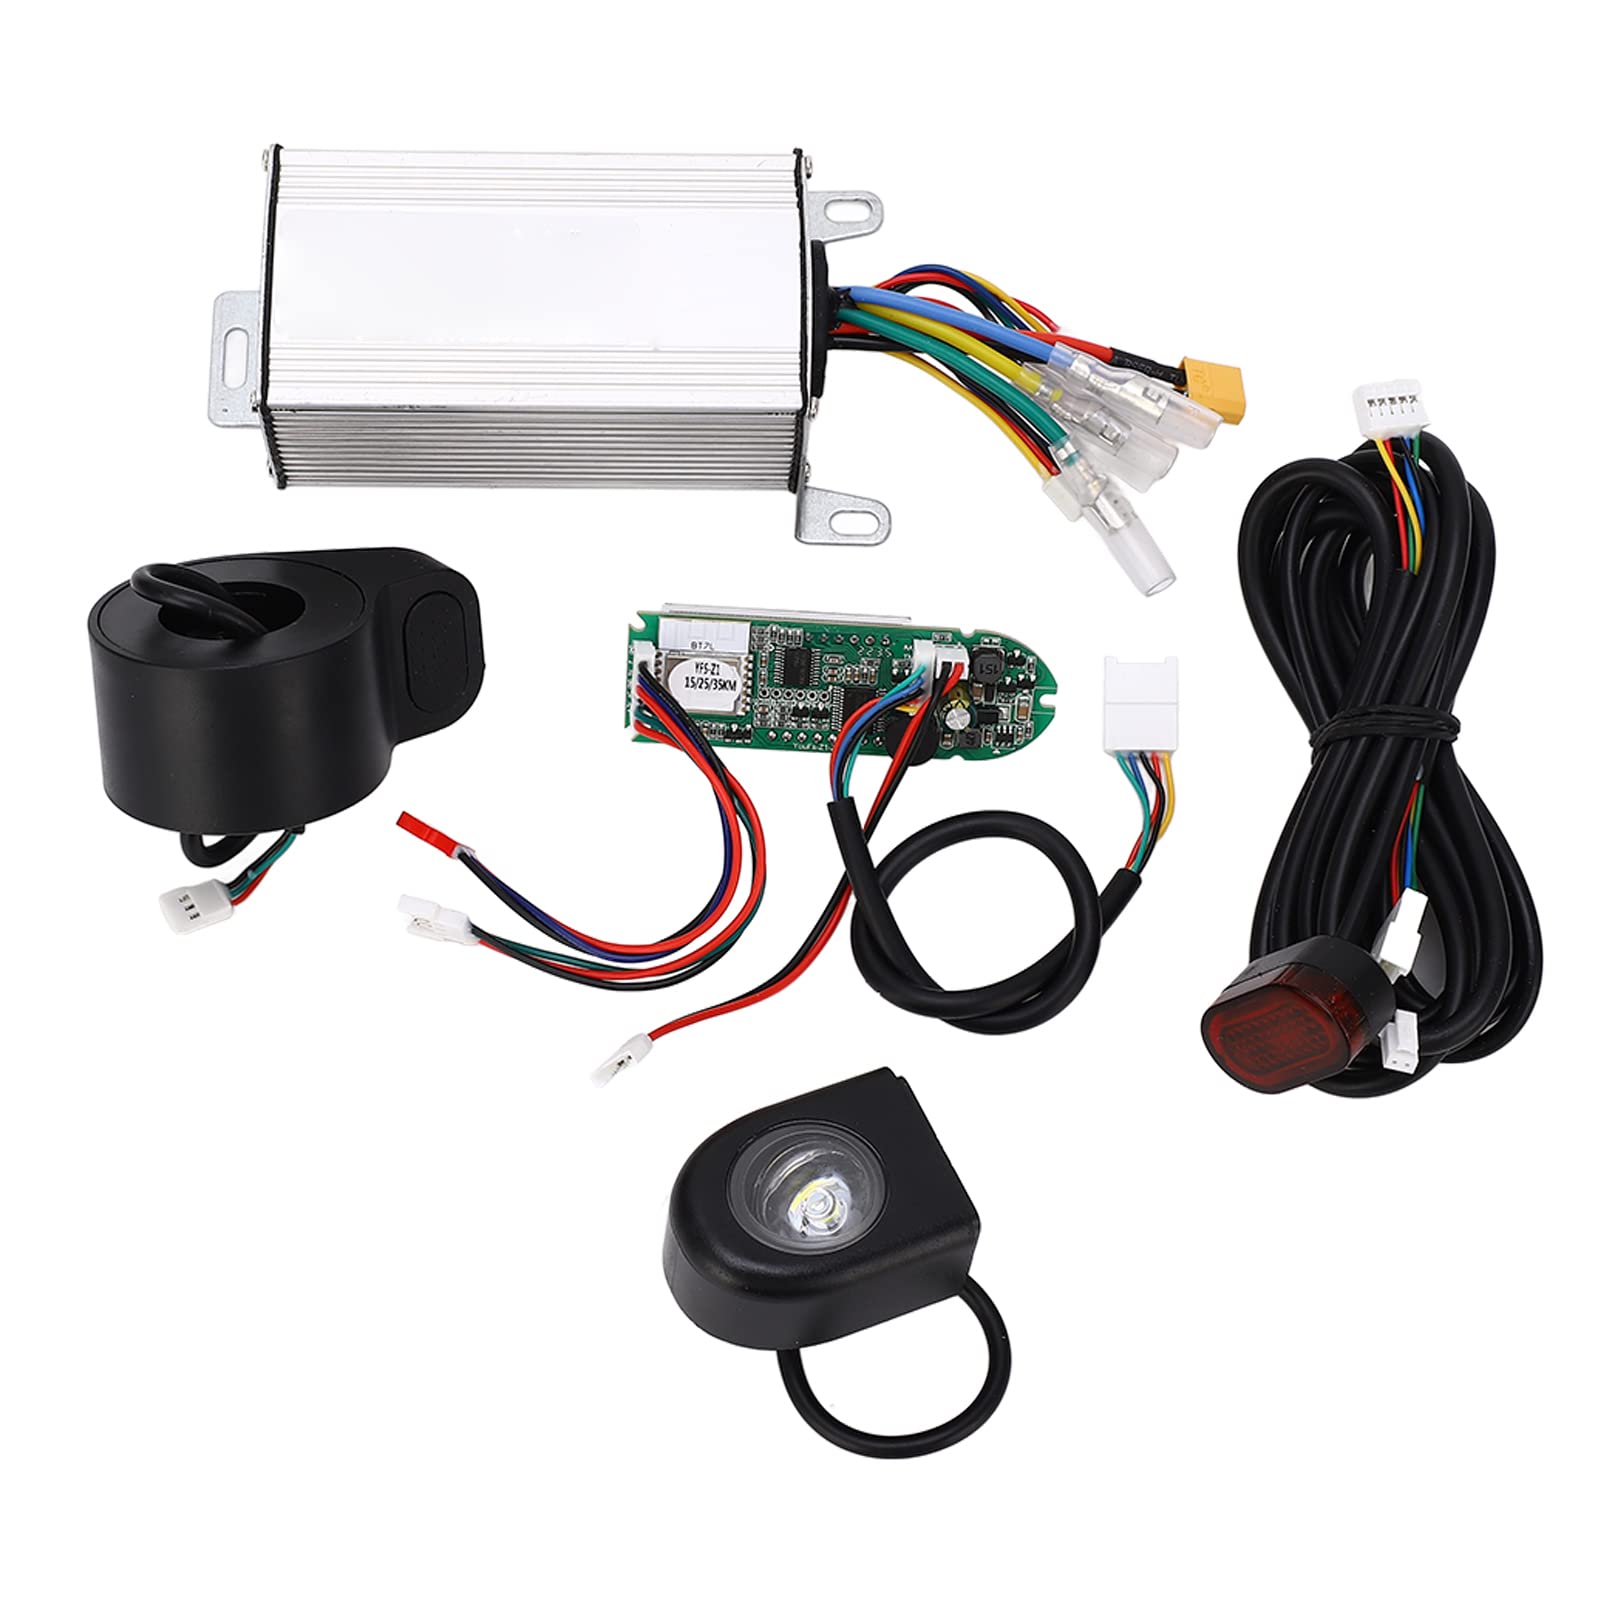 DC 36V 350W Electric Scooter Controller Aluminum Alloy Scooter Display Kit Electric Bike Scooter Accessories